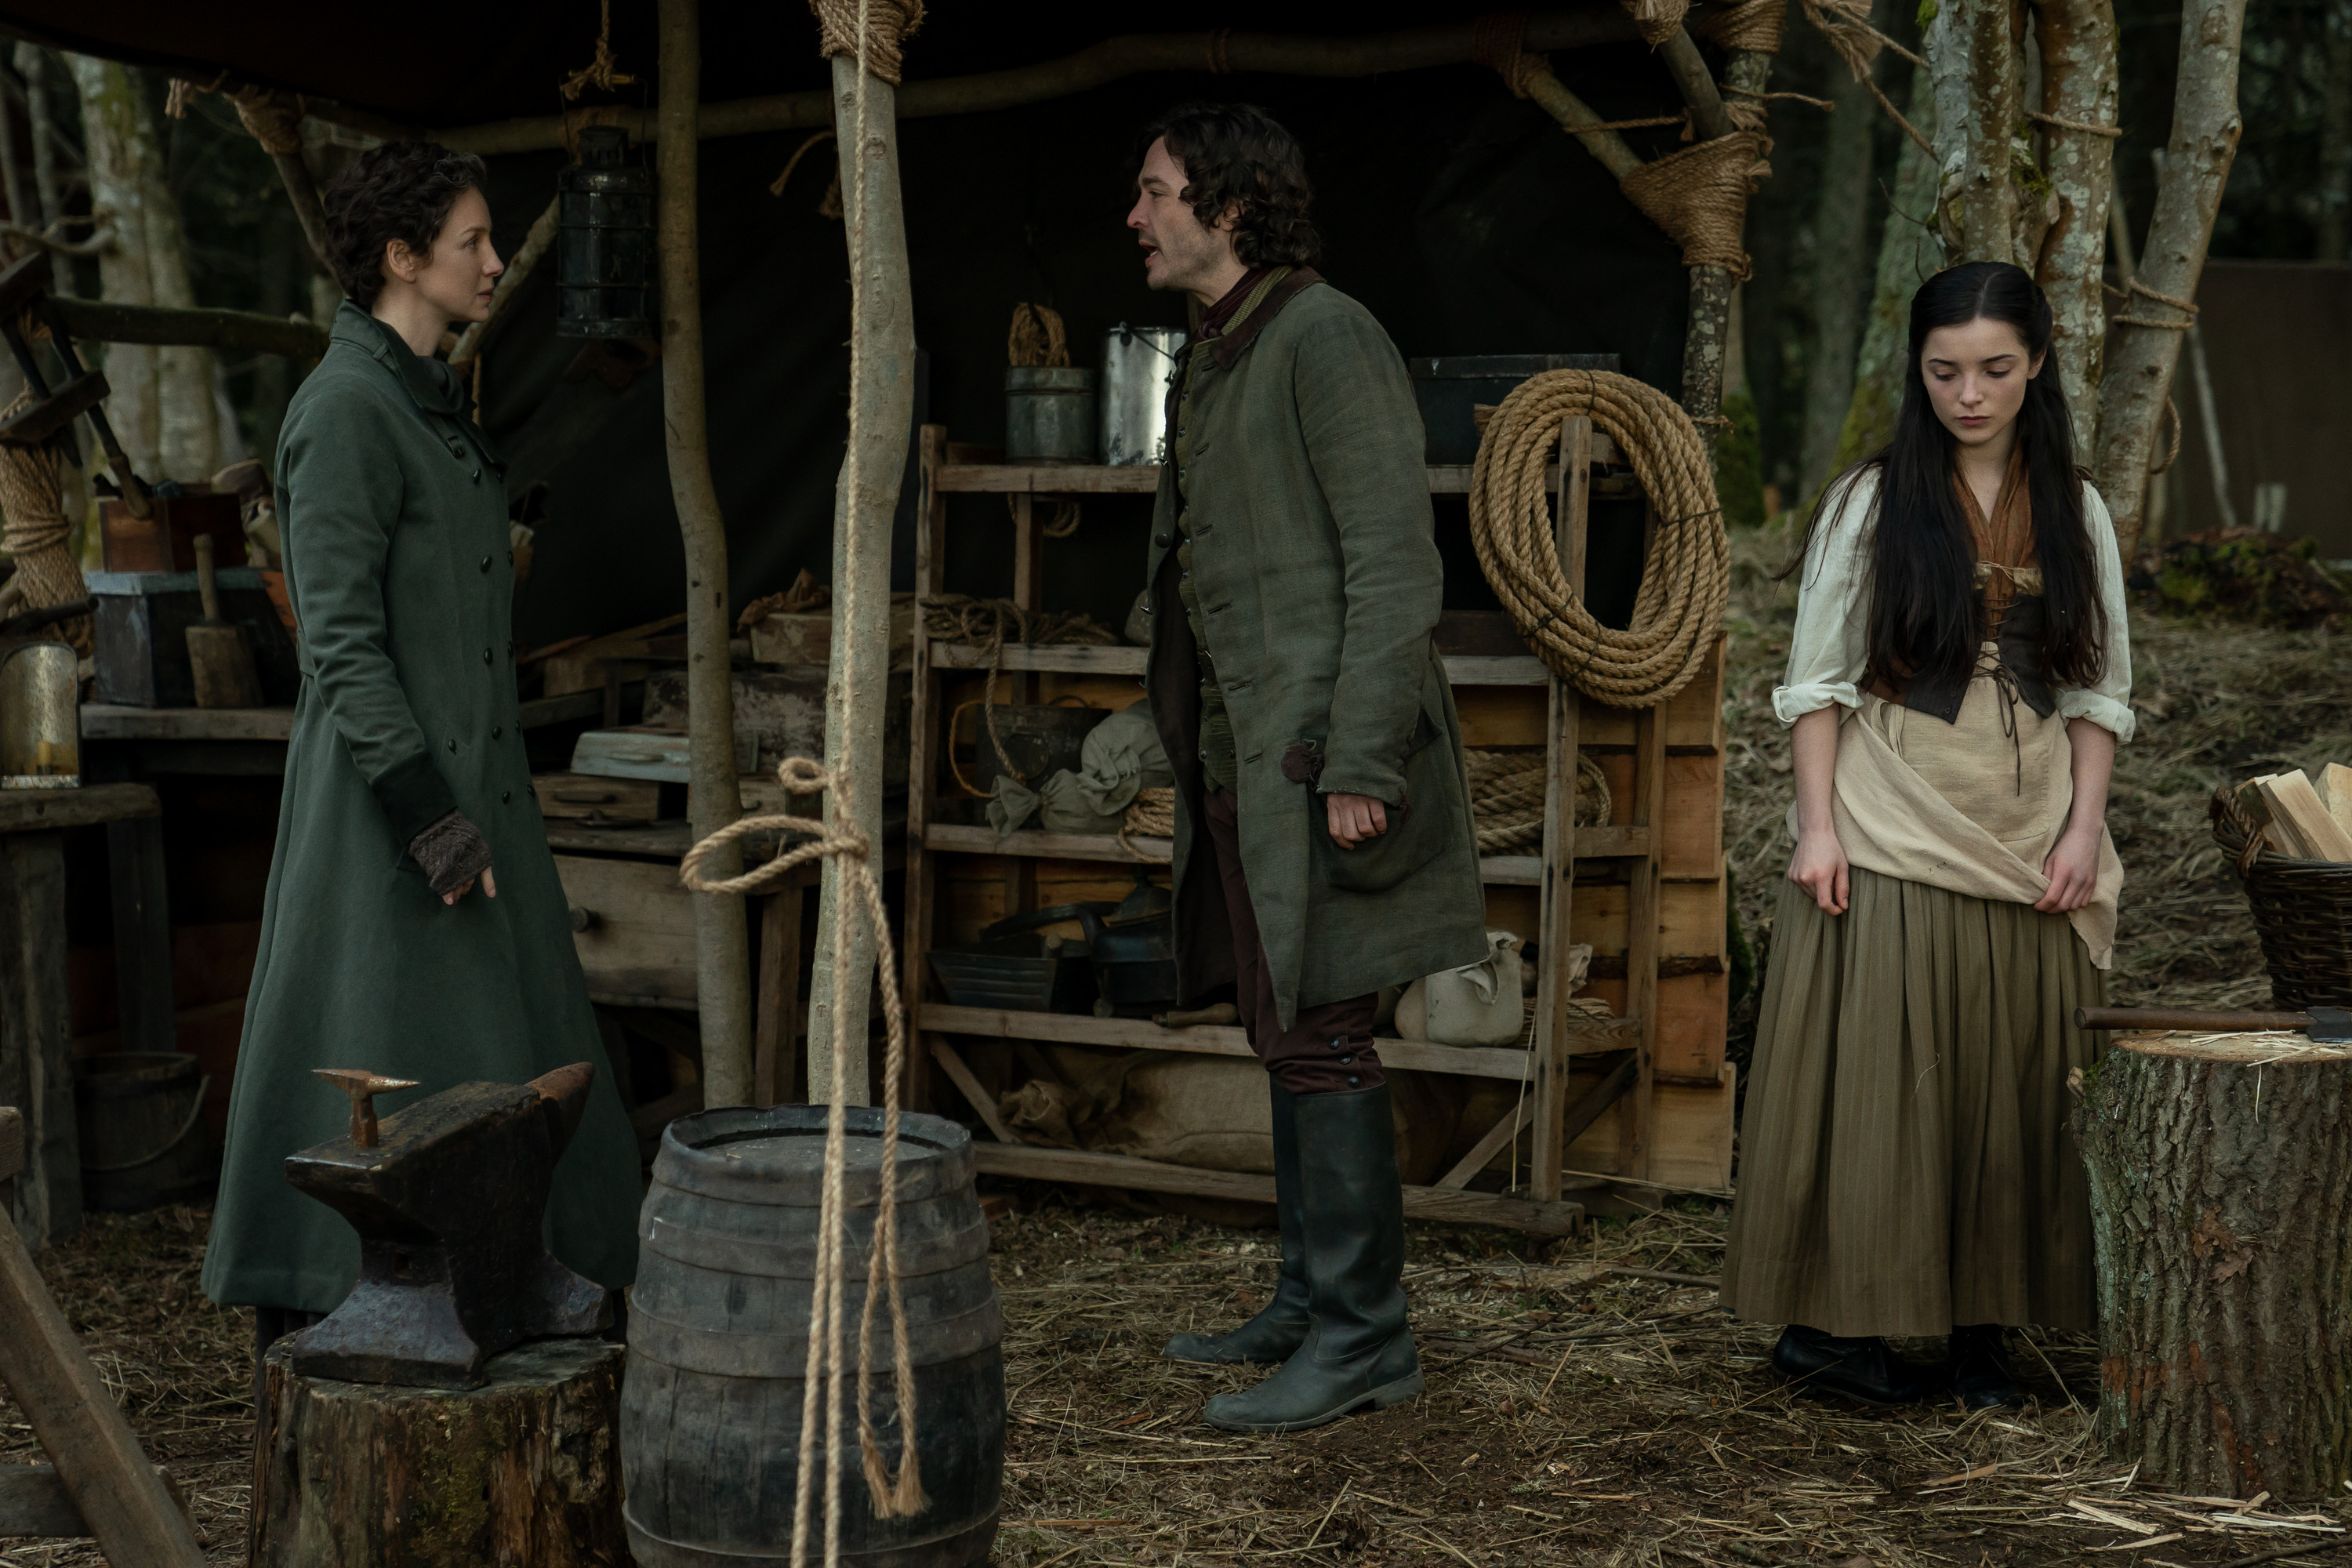 Outlander 6x06 "The World Turned Upside Down"